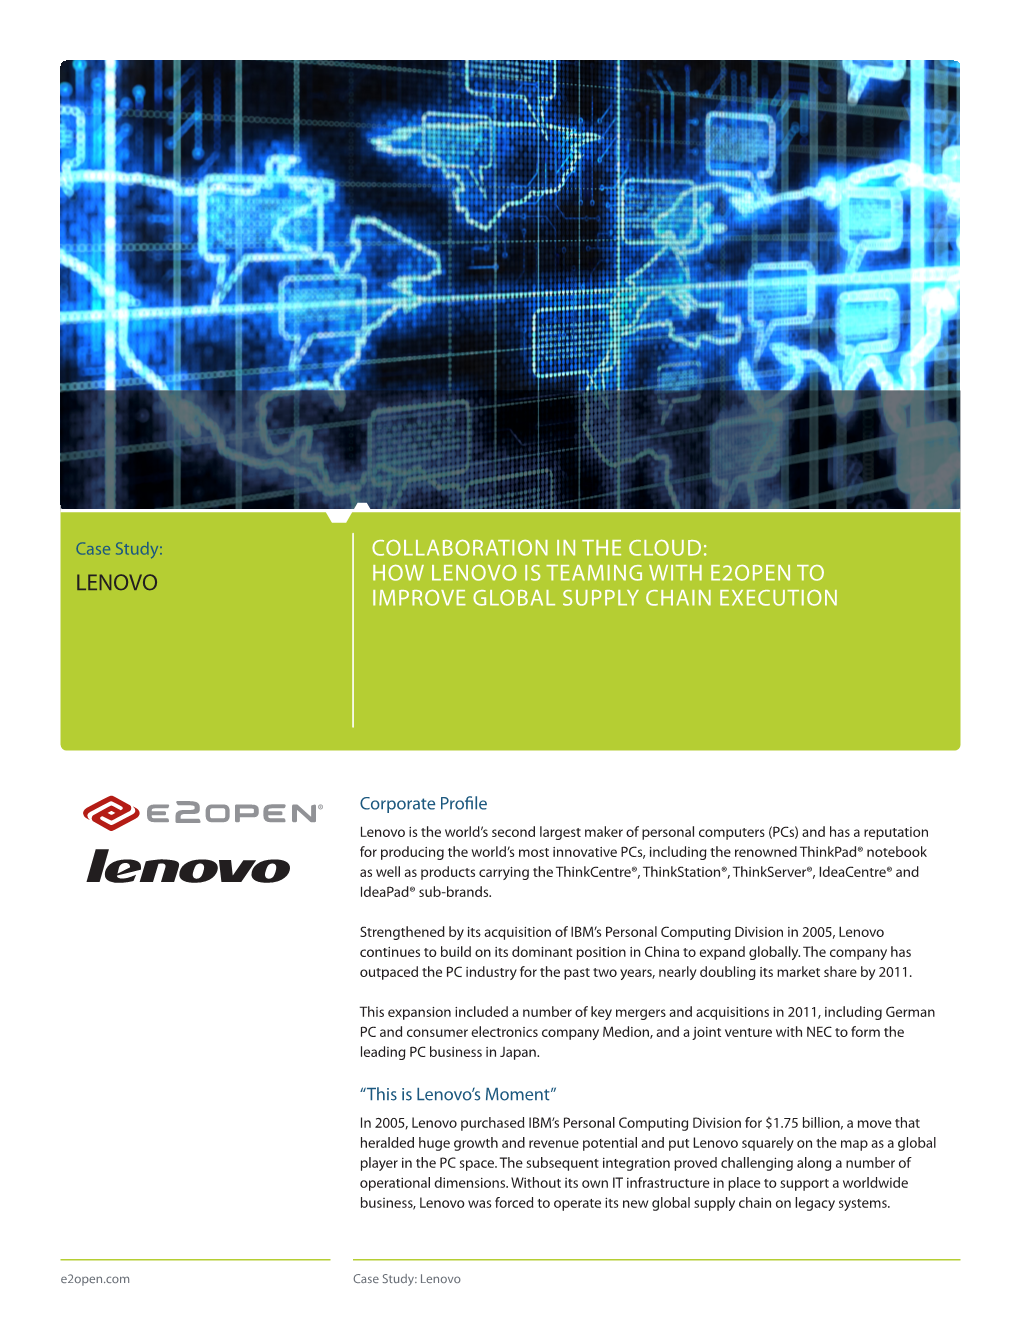 How Lenovo Is Teaming with E2open to Improve Global Supply Chain Execution